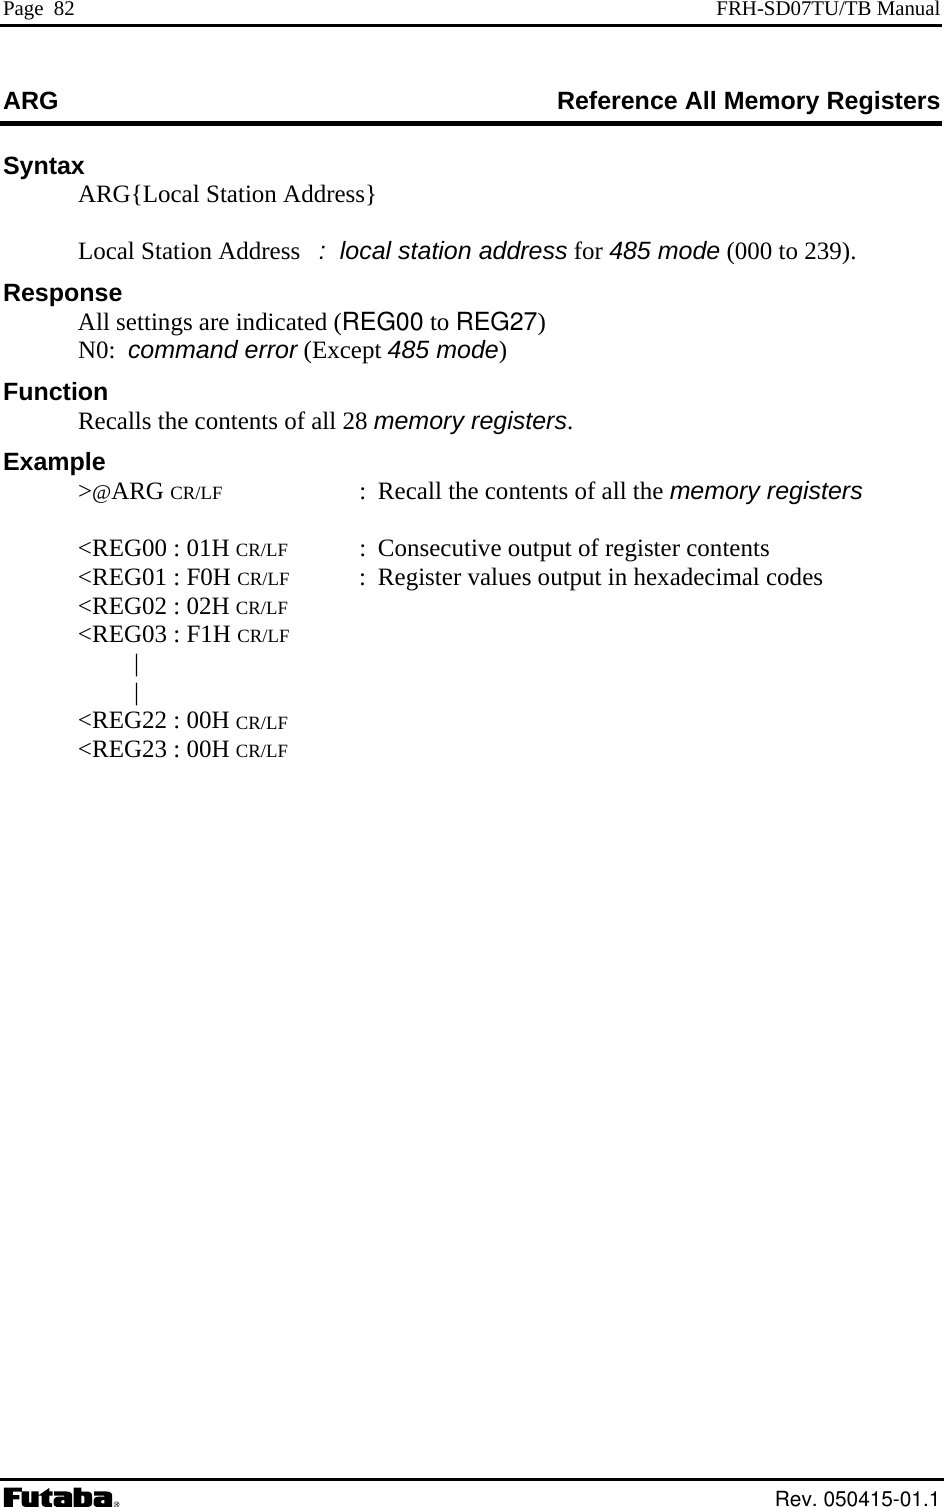 Page  82  FRH-SD07TU/TB Manual ARG  Reference All Memory Registers Syntax ARG{Local Station Address}       Local Station Address   :  local station address for 485 mRespons  A tti e i )  N om d Function  R ls t nteExample &gt;@RG   of all the  r   &lt;REG00 : 01H Cutput of registe  &lt;REG01 : F0H Cs output in hex i c  &lt;REG02 : 02H C  &lt;REG03 : F1H C |  |   &lt;REG22 : 00H C  &lt;REG23 : 00H Cod 9). e (000 to 23e ll se ngs ar ndicated (REG00 to REG270:  c man error (Except 485 mode)  ecal he co nts of all 28 memory registers.  A  CR/LF :  Recall the contents  memory  egisters R/LF  :  Consecutive o r contents R/LF  :  Register value adec mal  odes R/LF R/LF R/LF R/LF  Rev. 050415-01.1 